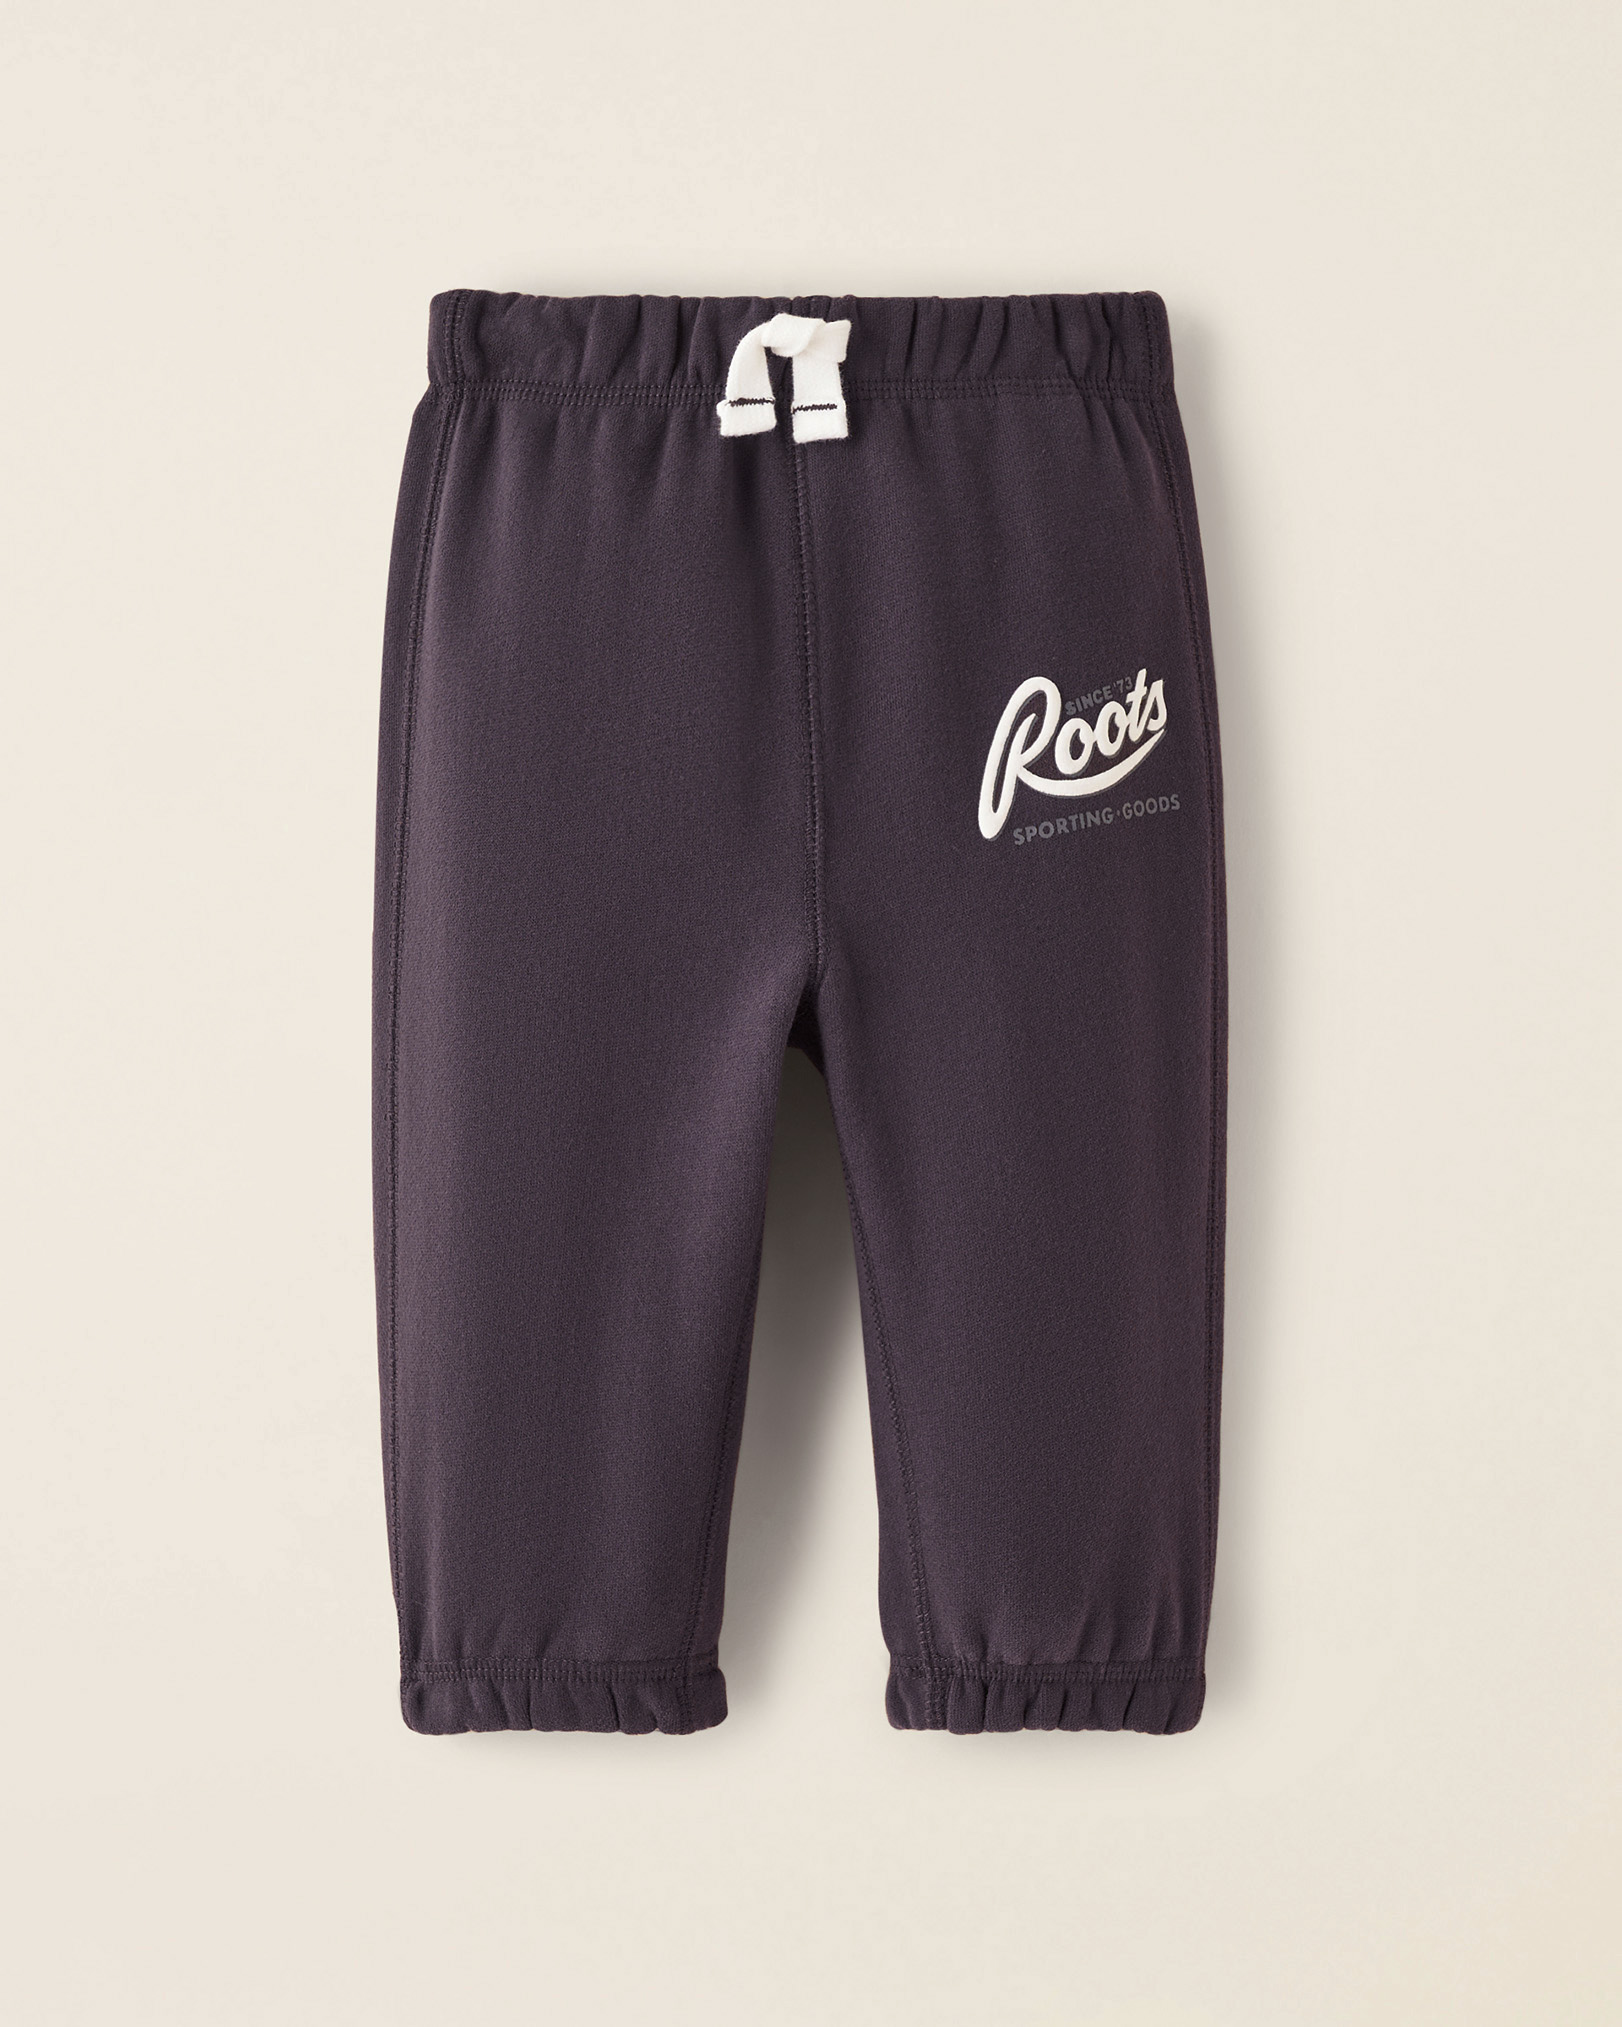 Roots Baby Sporting Goods Original Pant in Charcoal Black